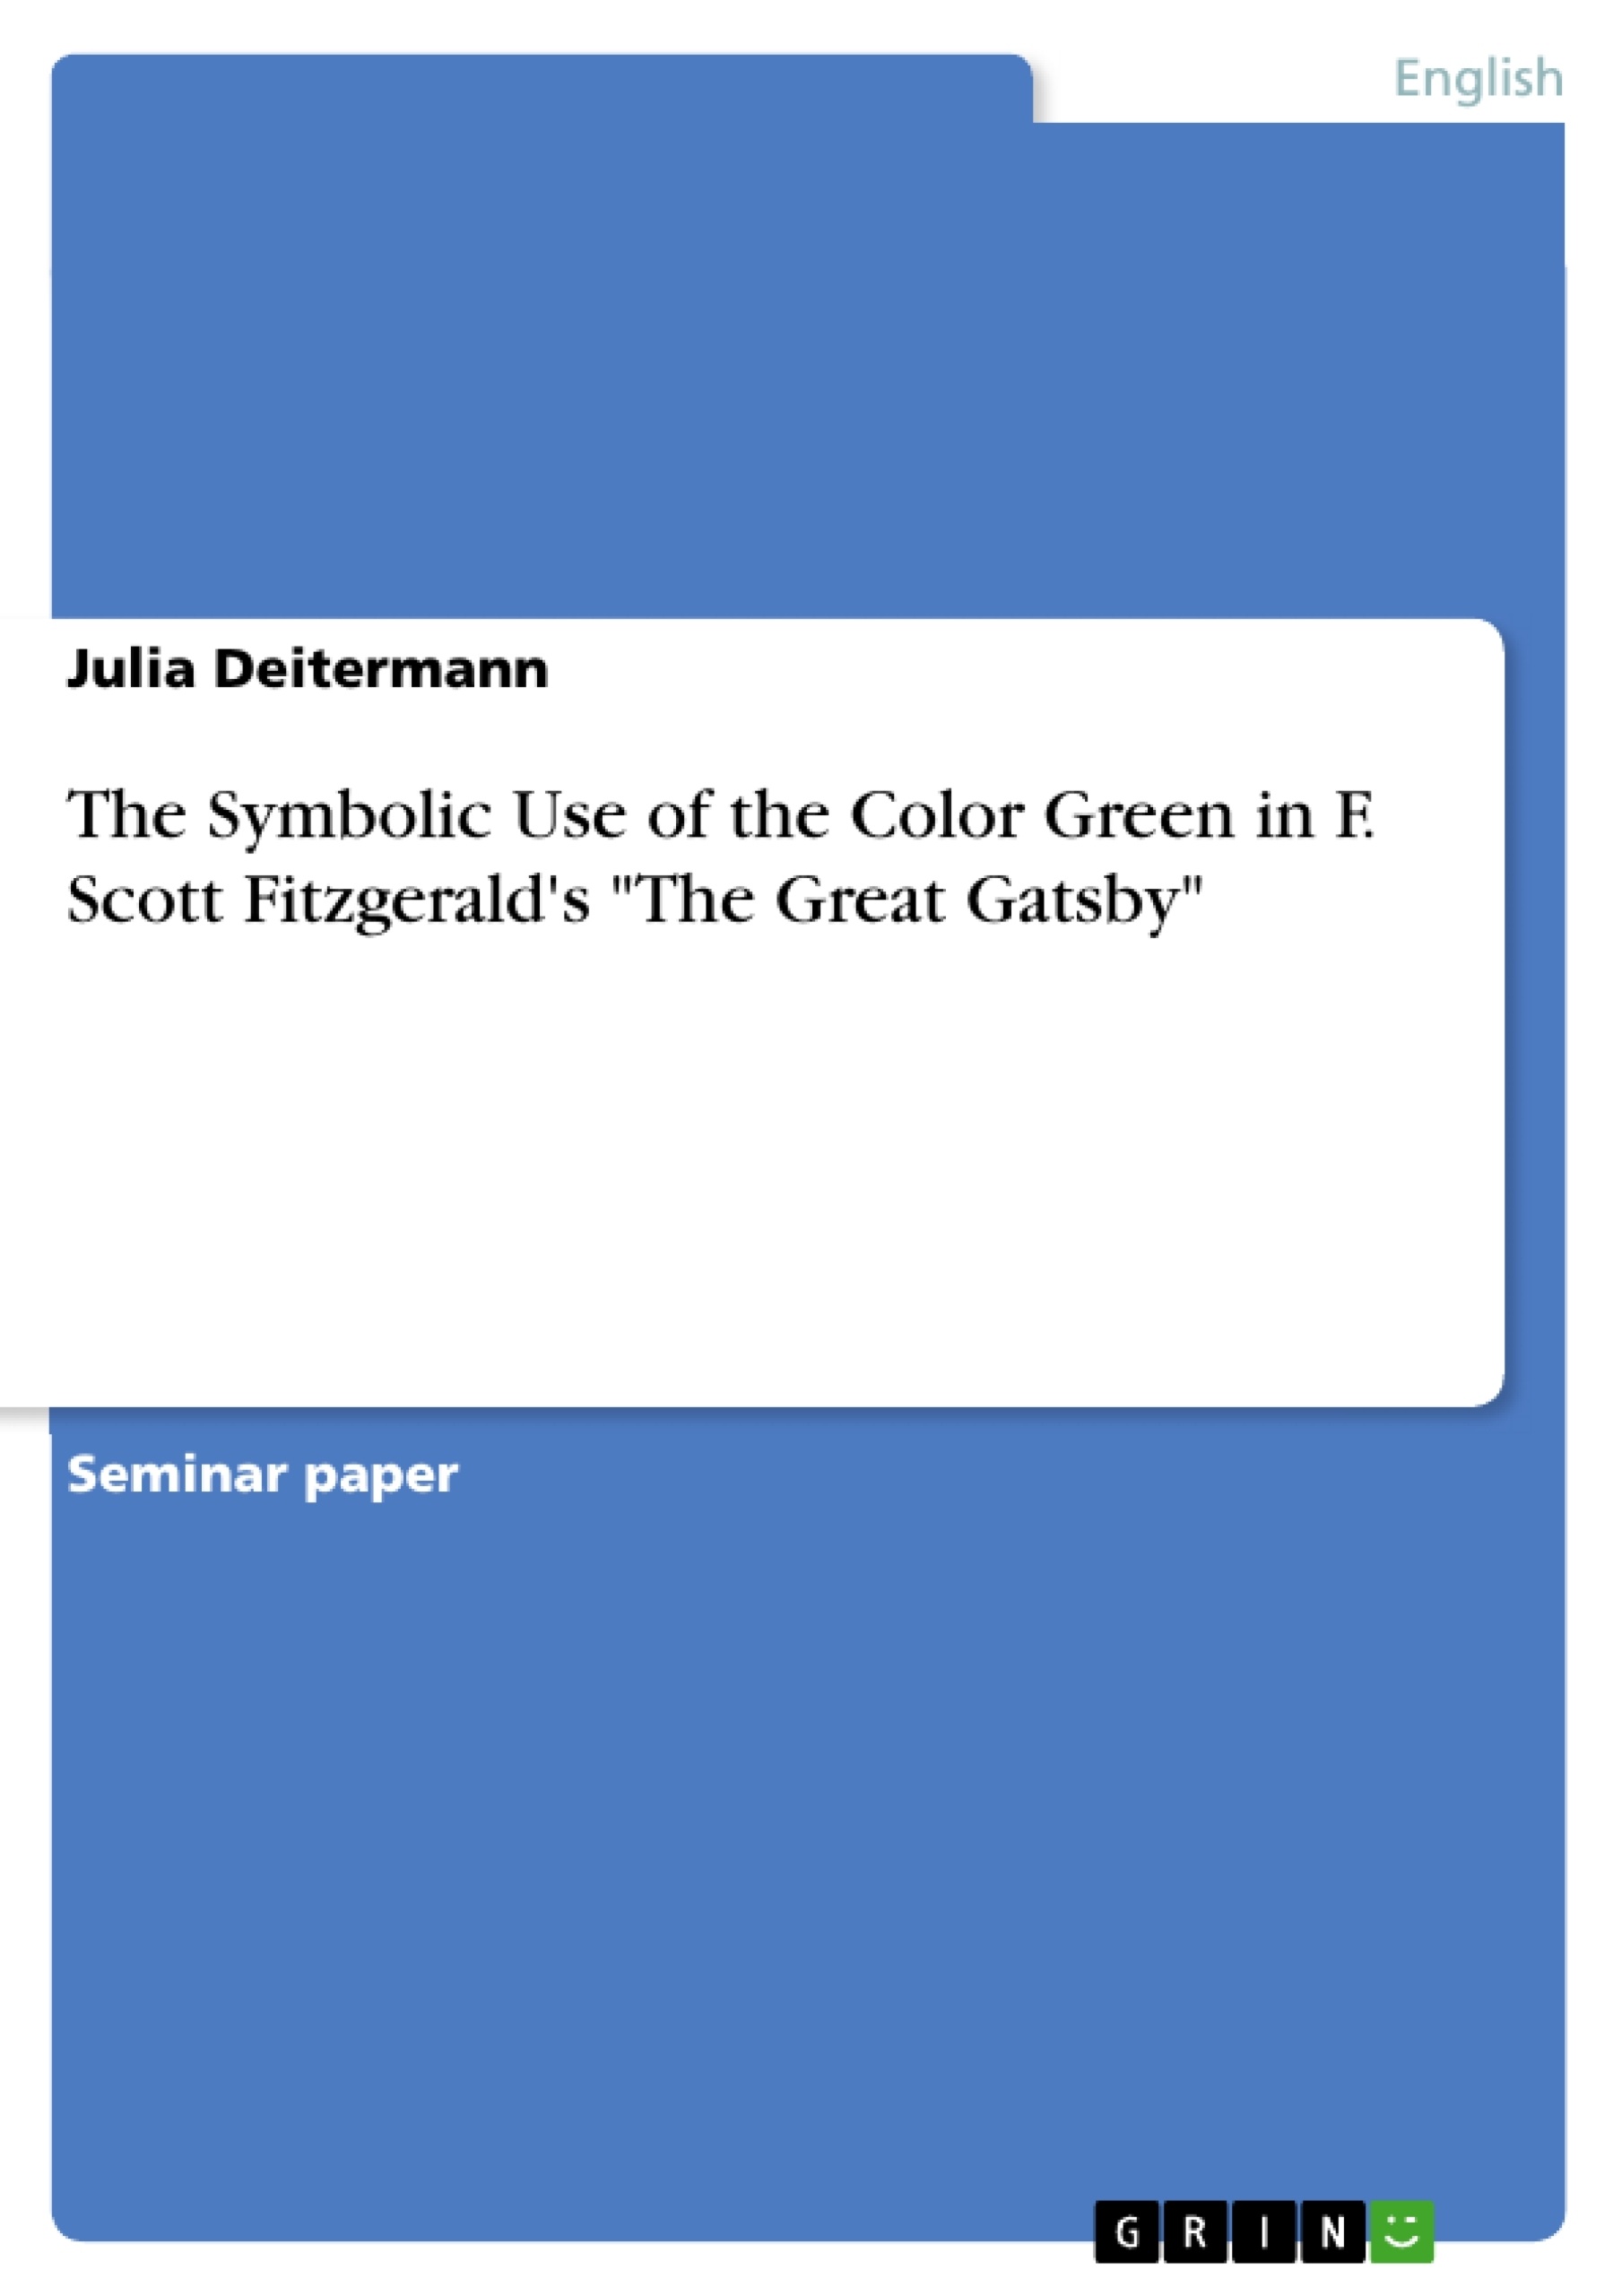 Título: The Symbolic Use of the Color Green in F. Scott Fitzgerald's "The Great Gatsby"